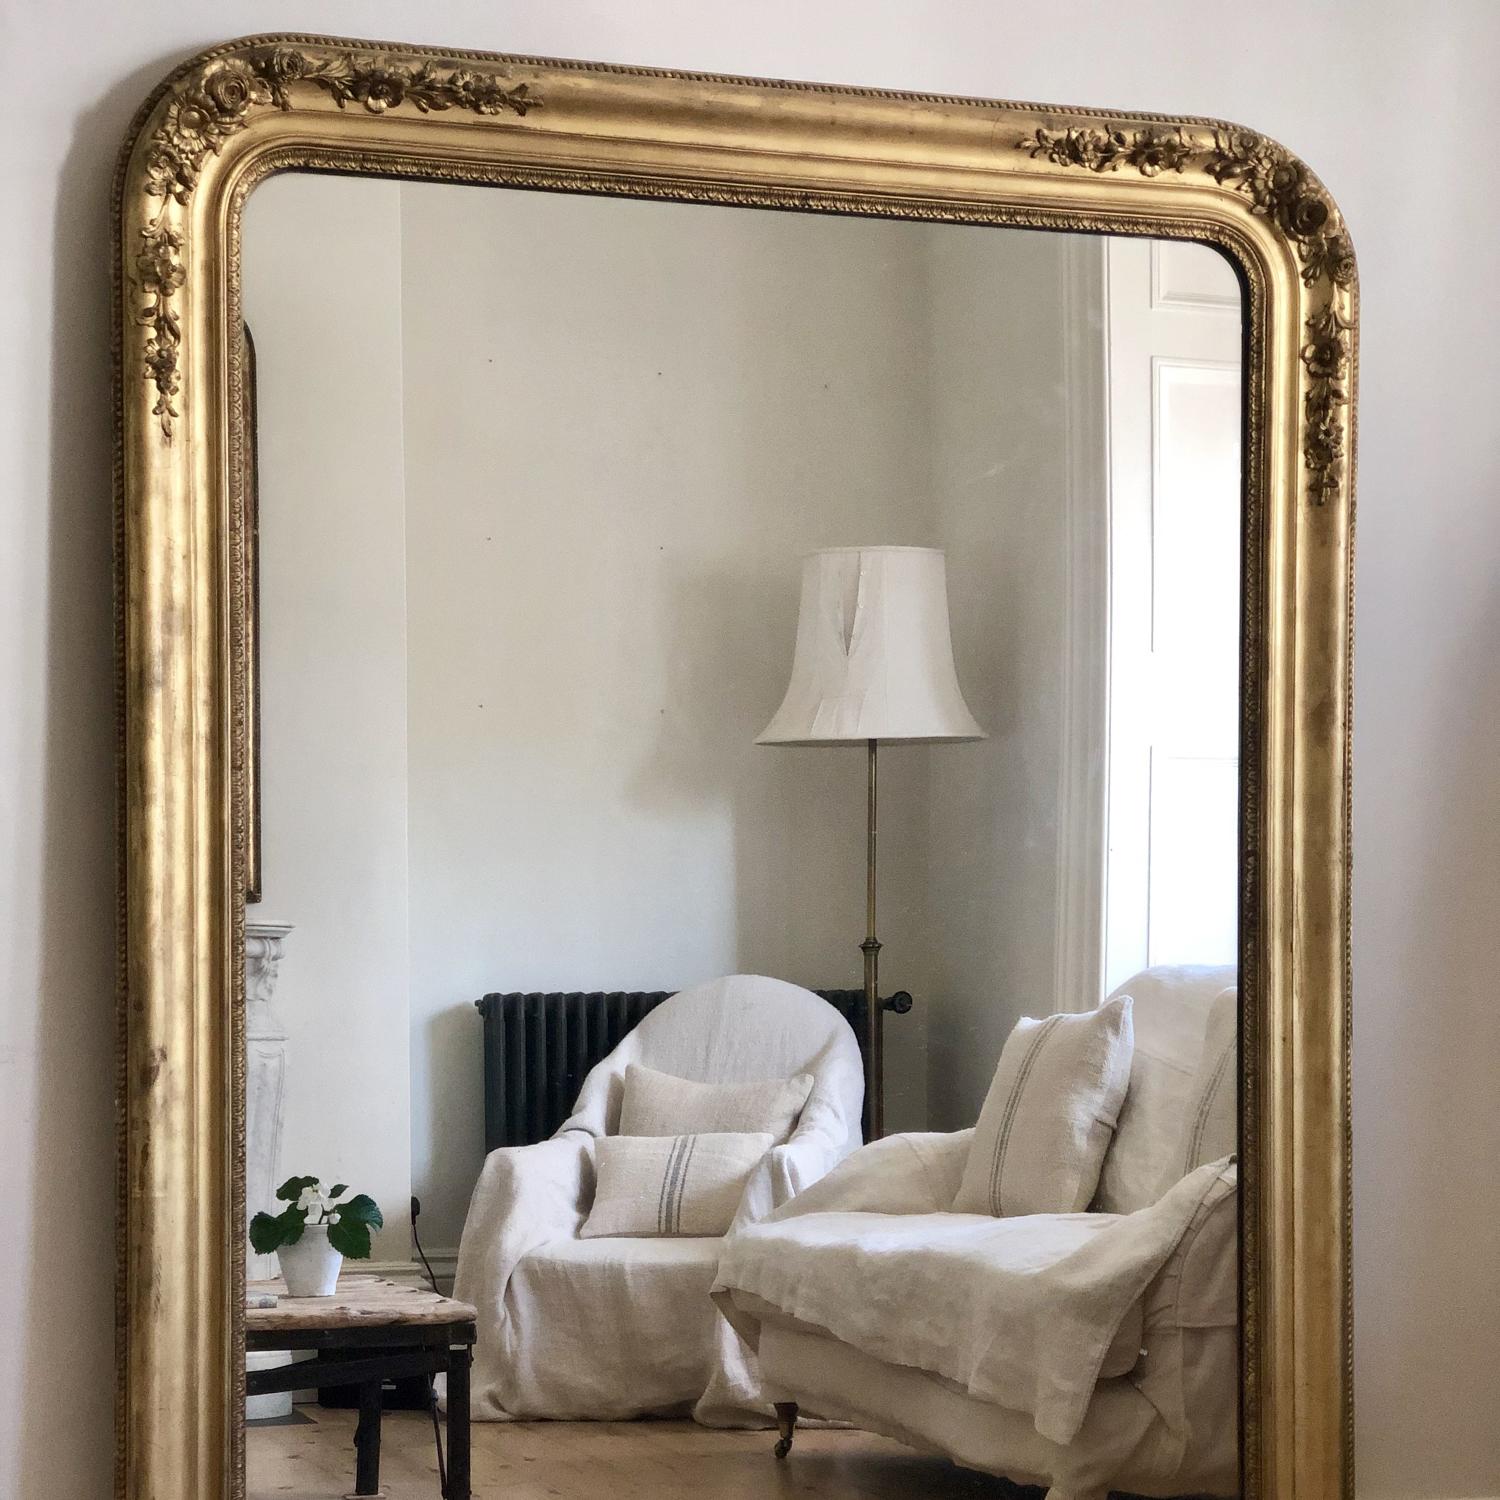 Huge French antique 19th century gilt leaner mirror